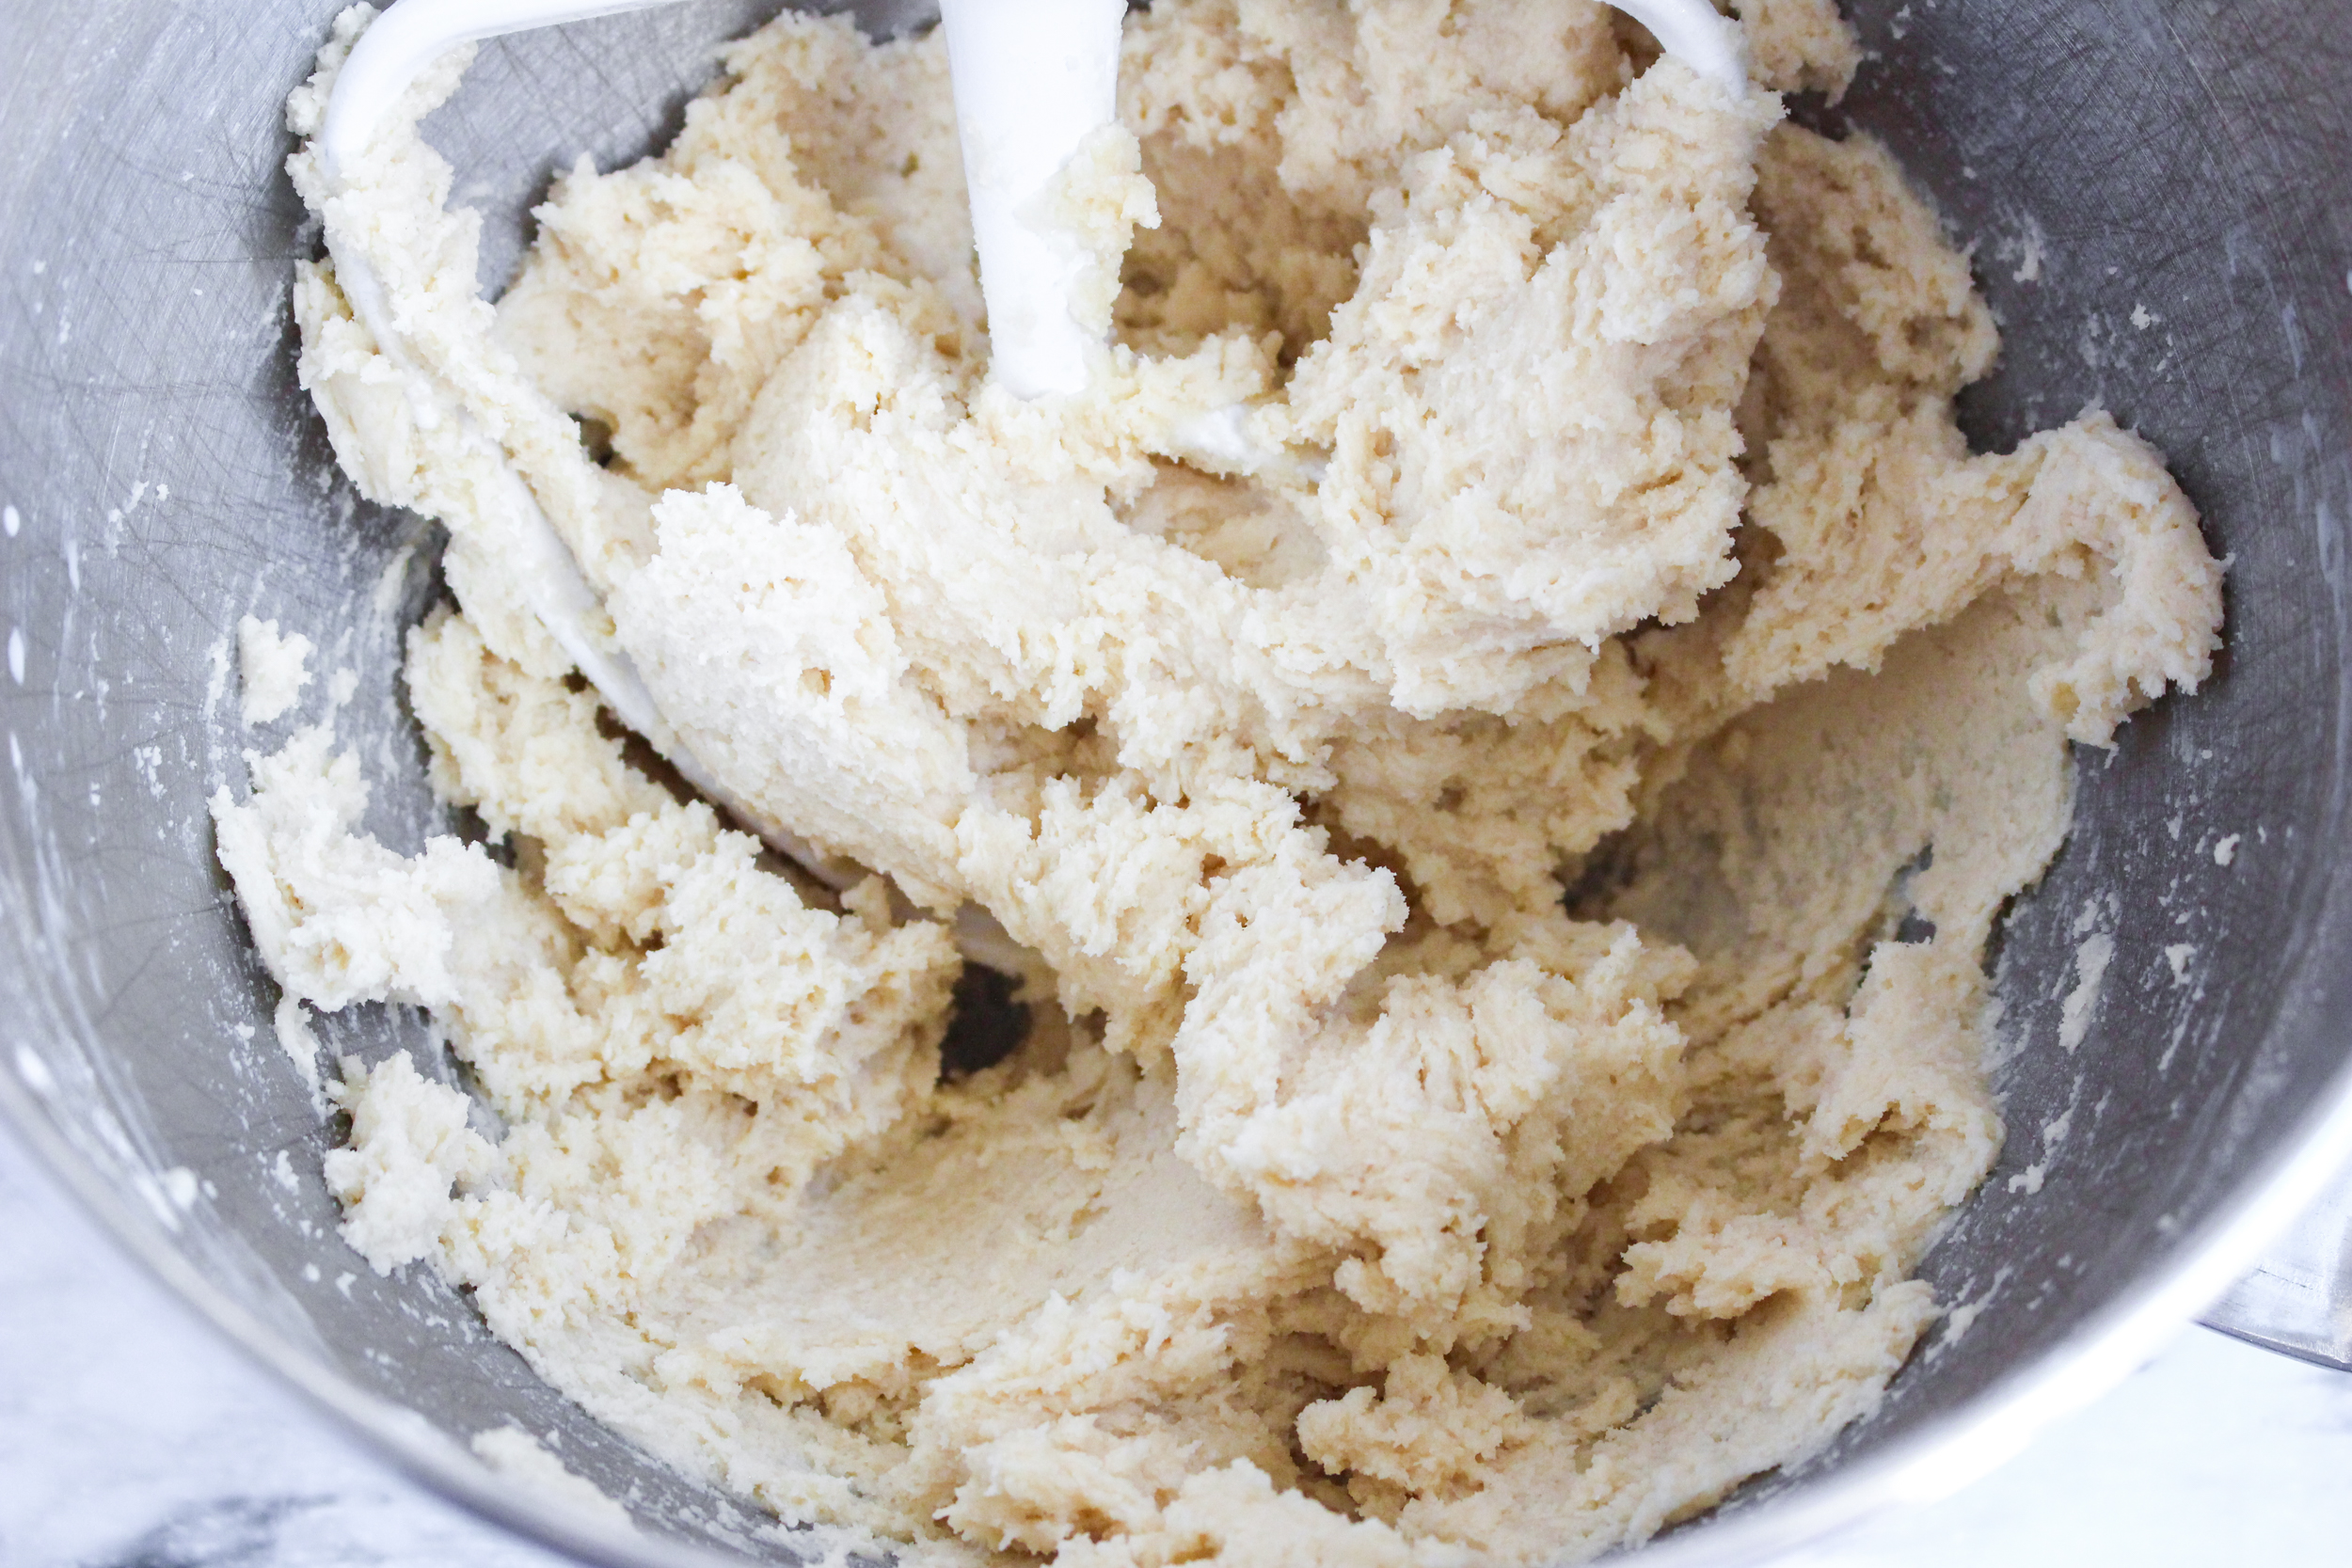 Blossom Cookie dough in a kitchen aid mixing bowl.